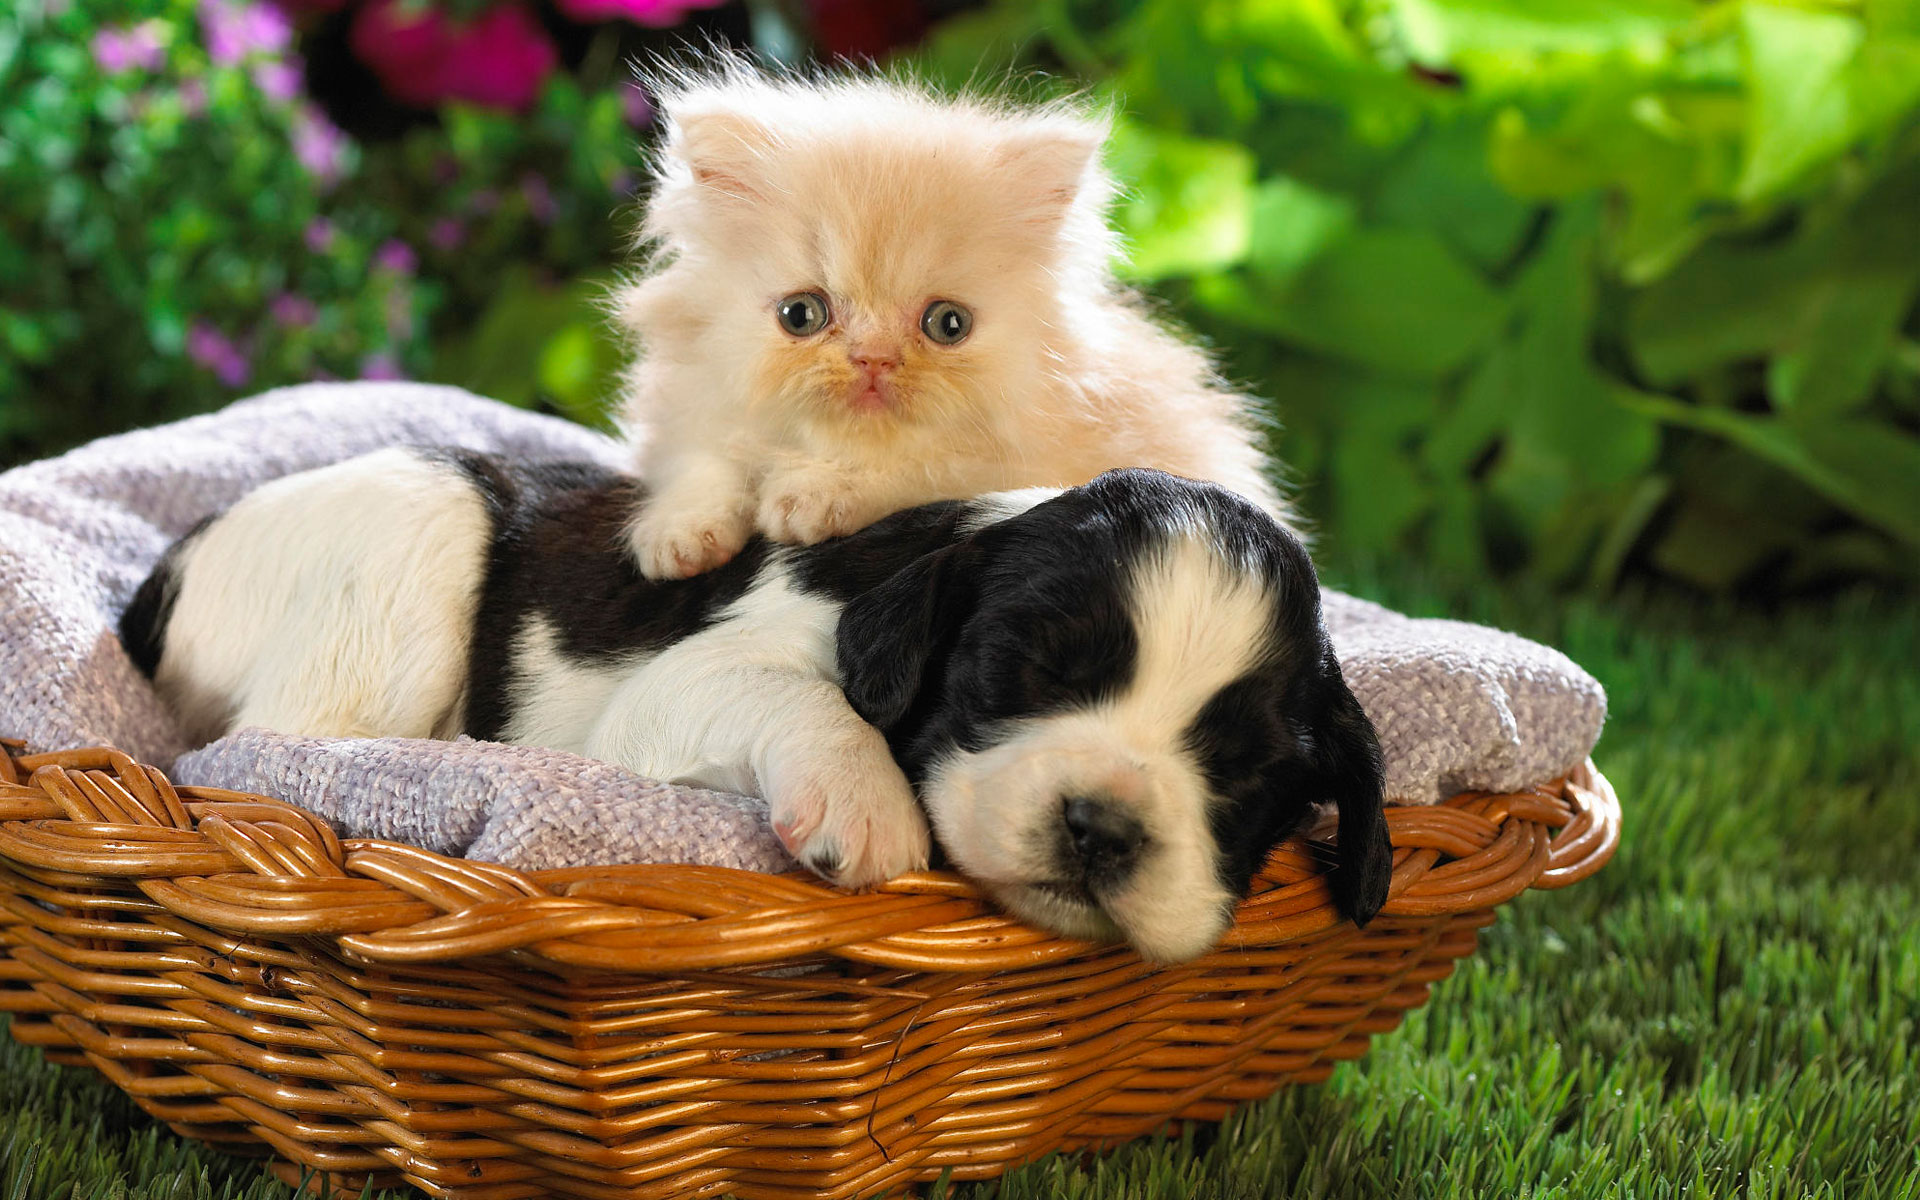  cute puppy desktop wallpaper download baby animal pictures cute puppy